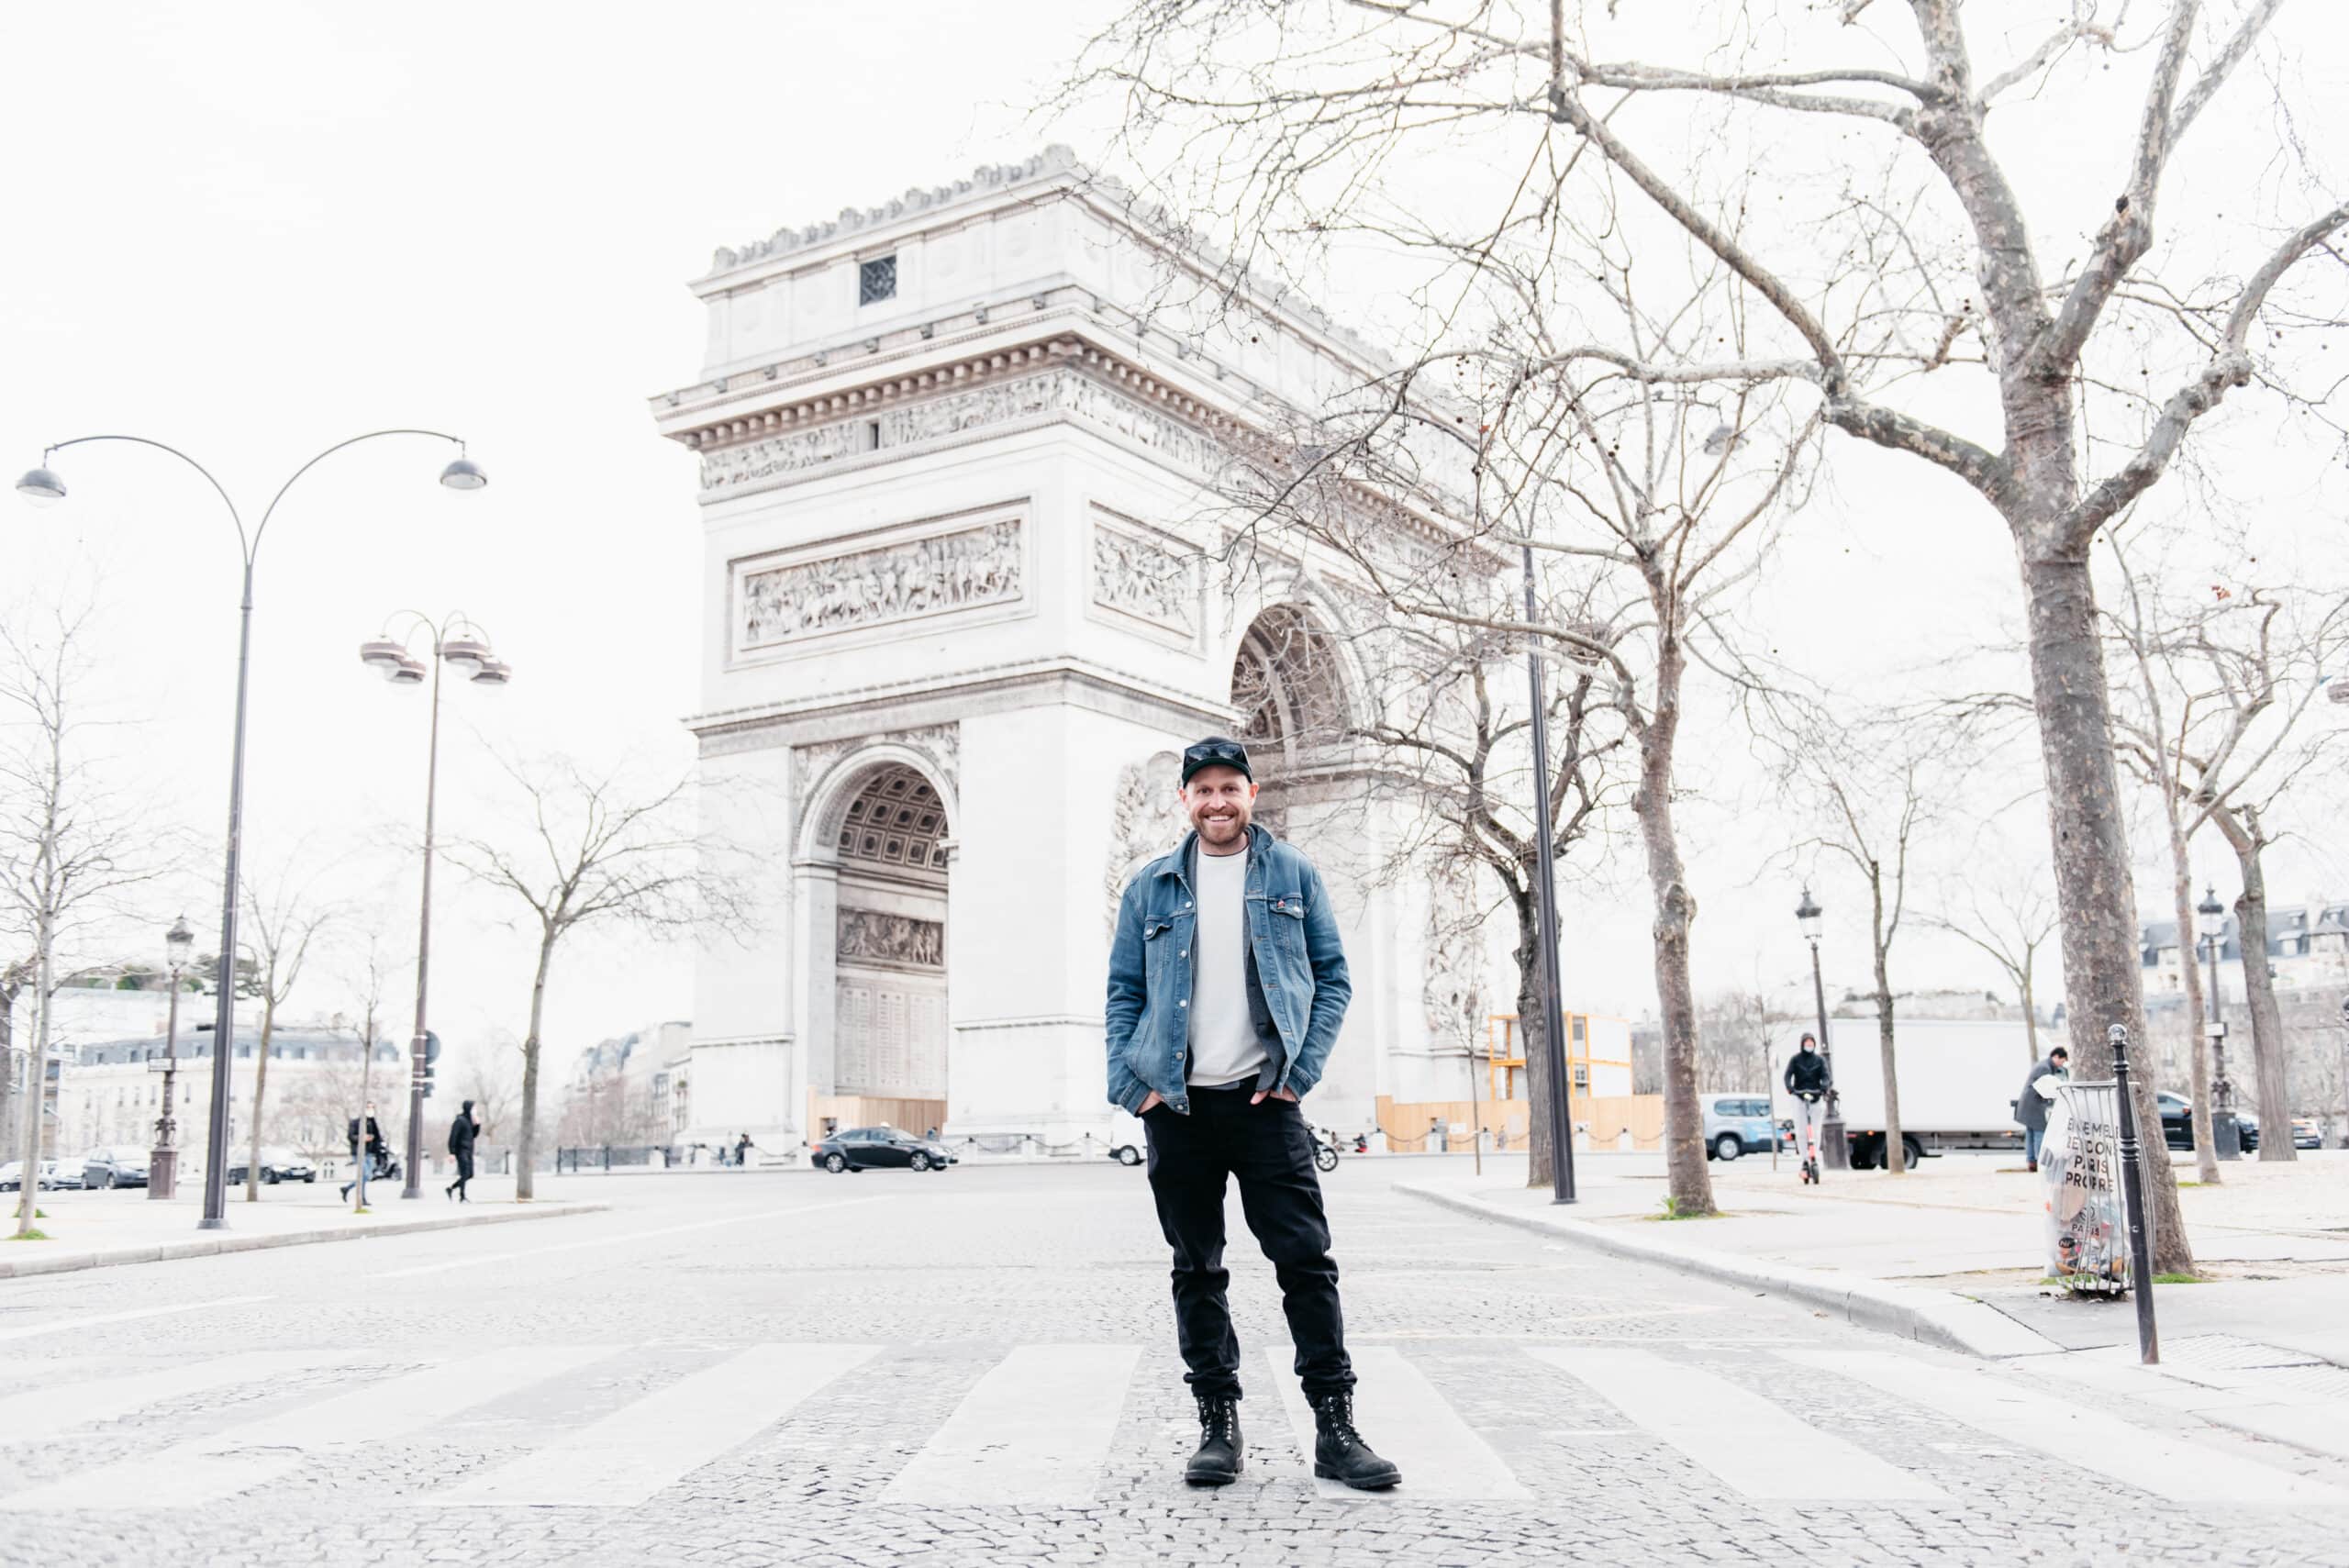 Best things to do in Paris France - Jay Swanson - Arc de Triomphe photo by My Paris Portraits